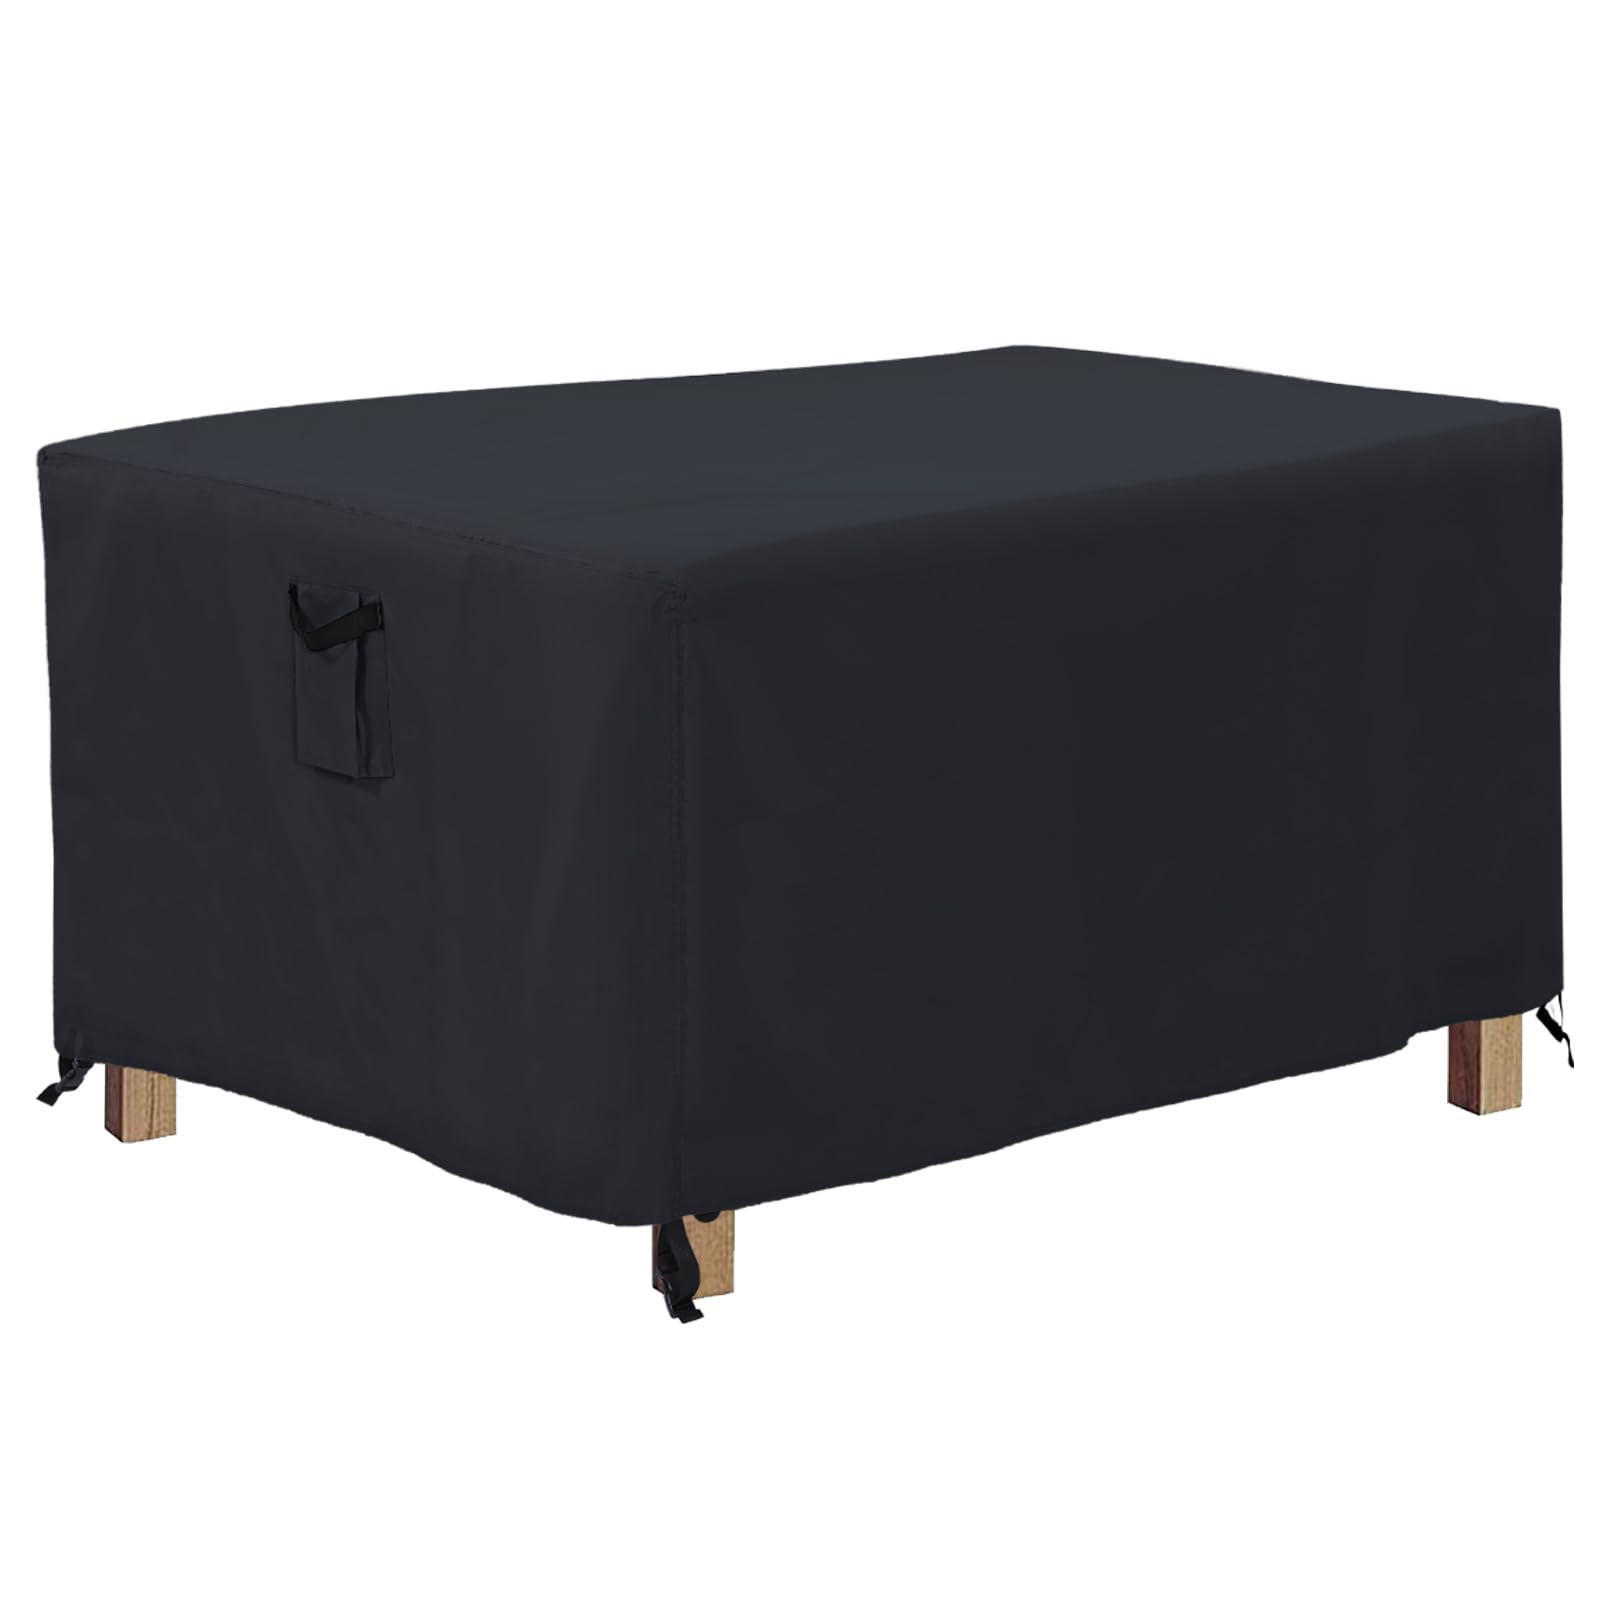 ABCCANOPY Coffee Table Cover Universal Outdoor Table Cover Small Table Cover Waterproof and Dustproof Furniture Cover 36x22x18 Black